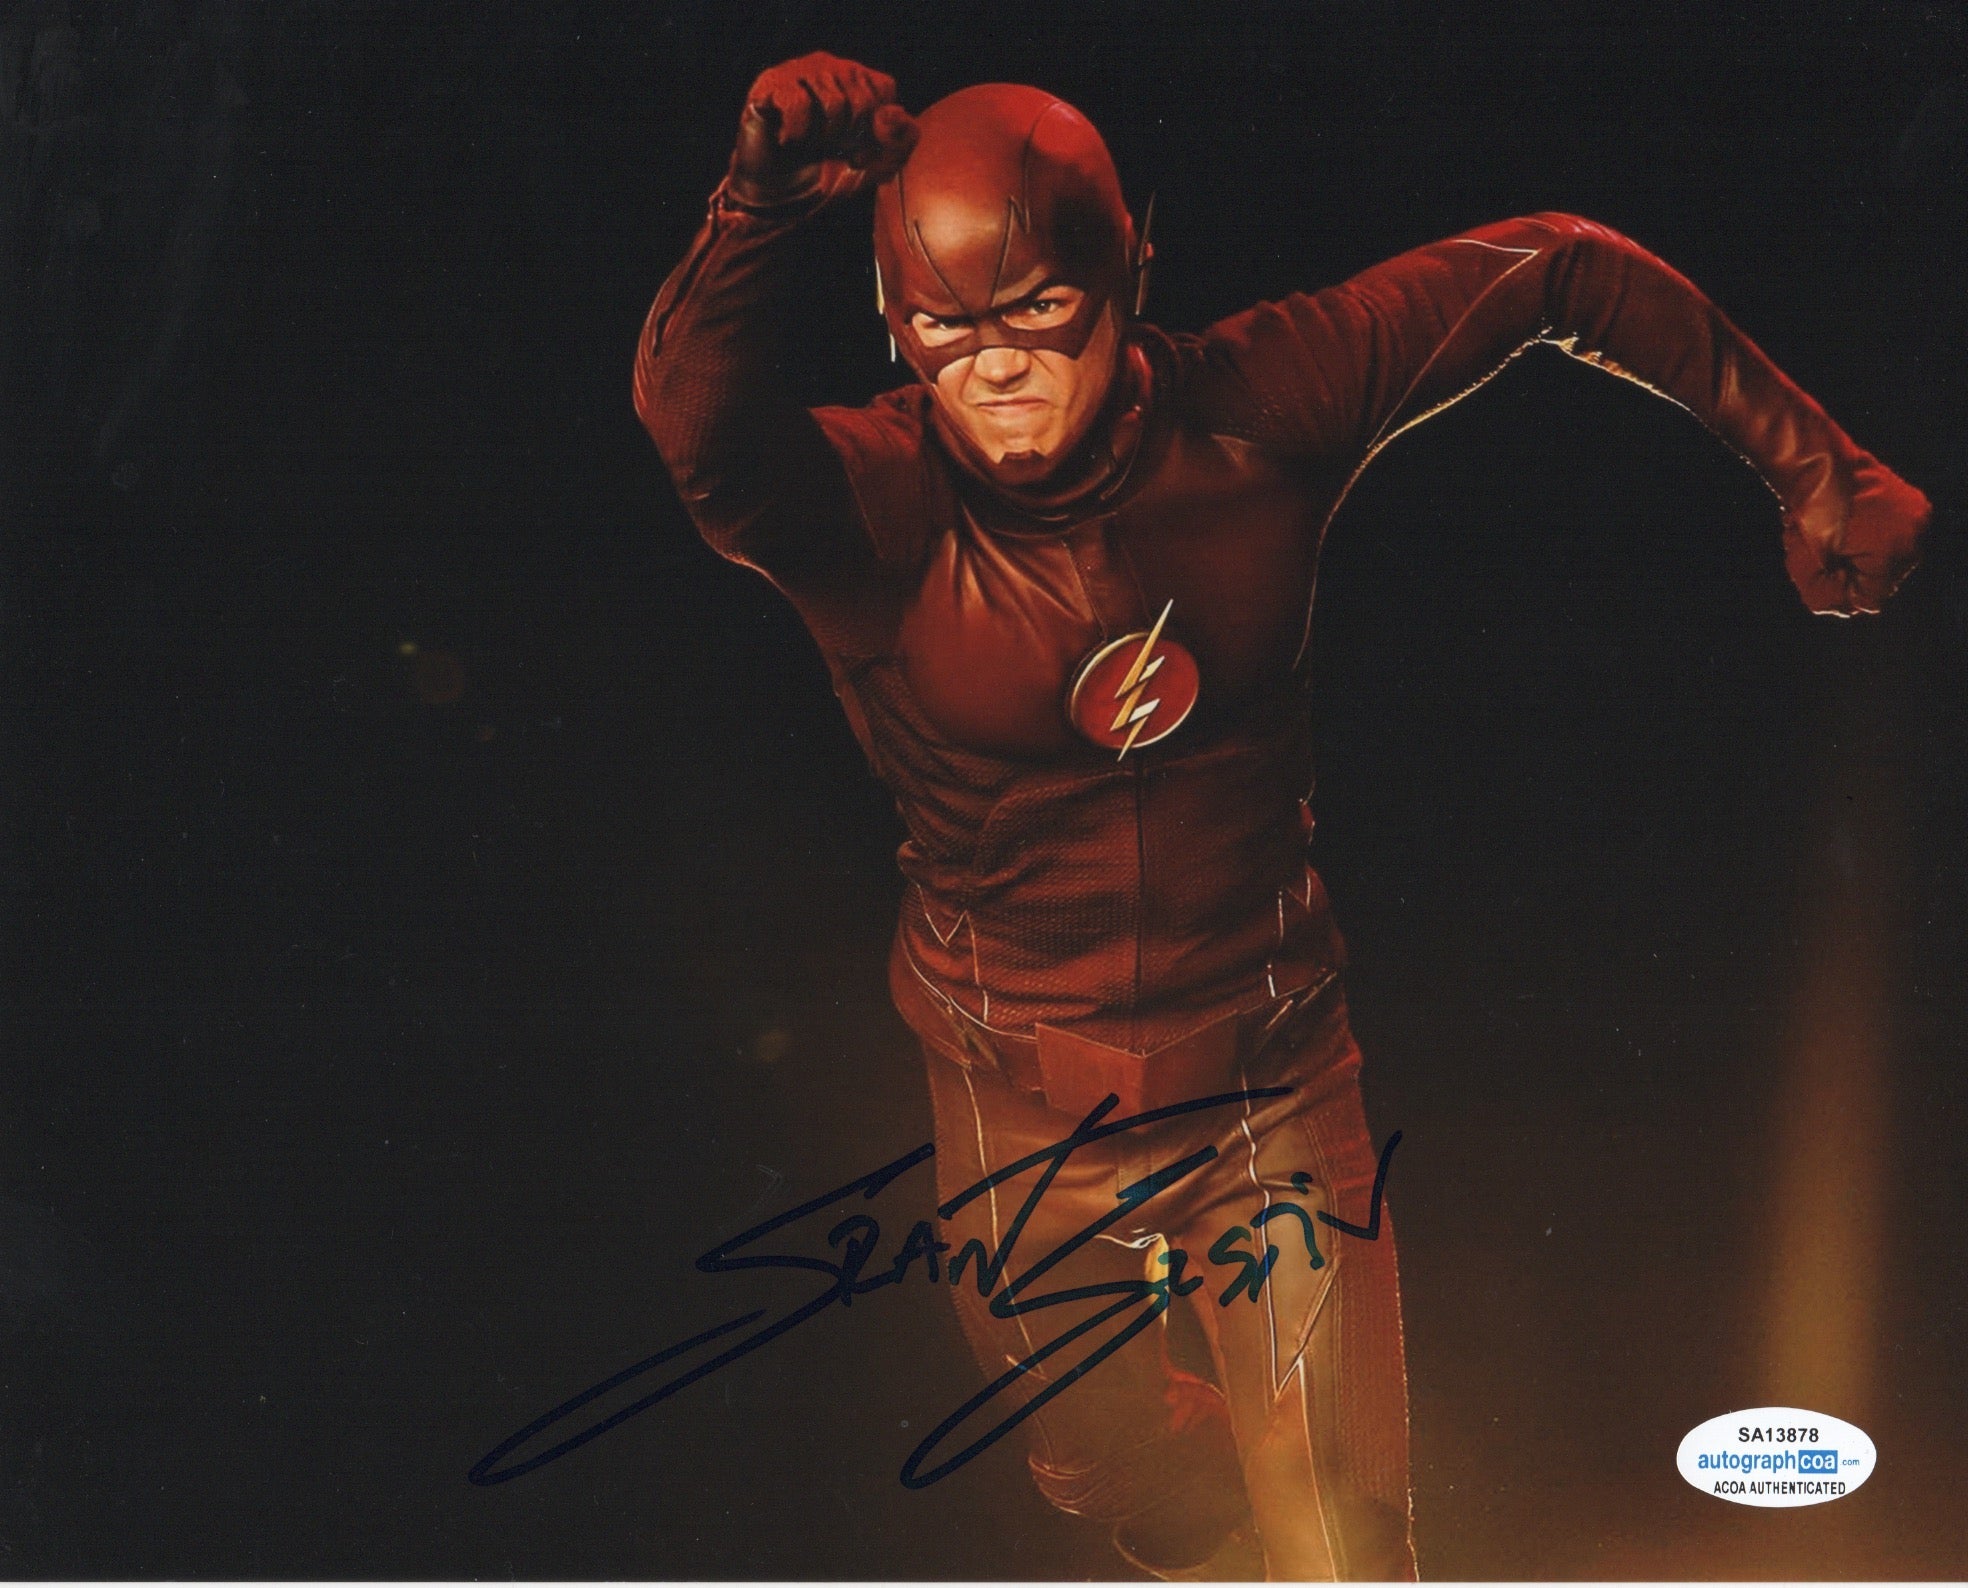 Grant Gustin The Flash Signed Autograph 8x10 Photo ACOA #2 - Outlaw Hobbies Authentic Autographs